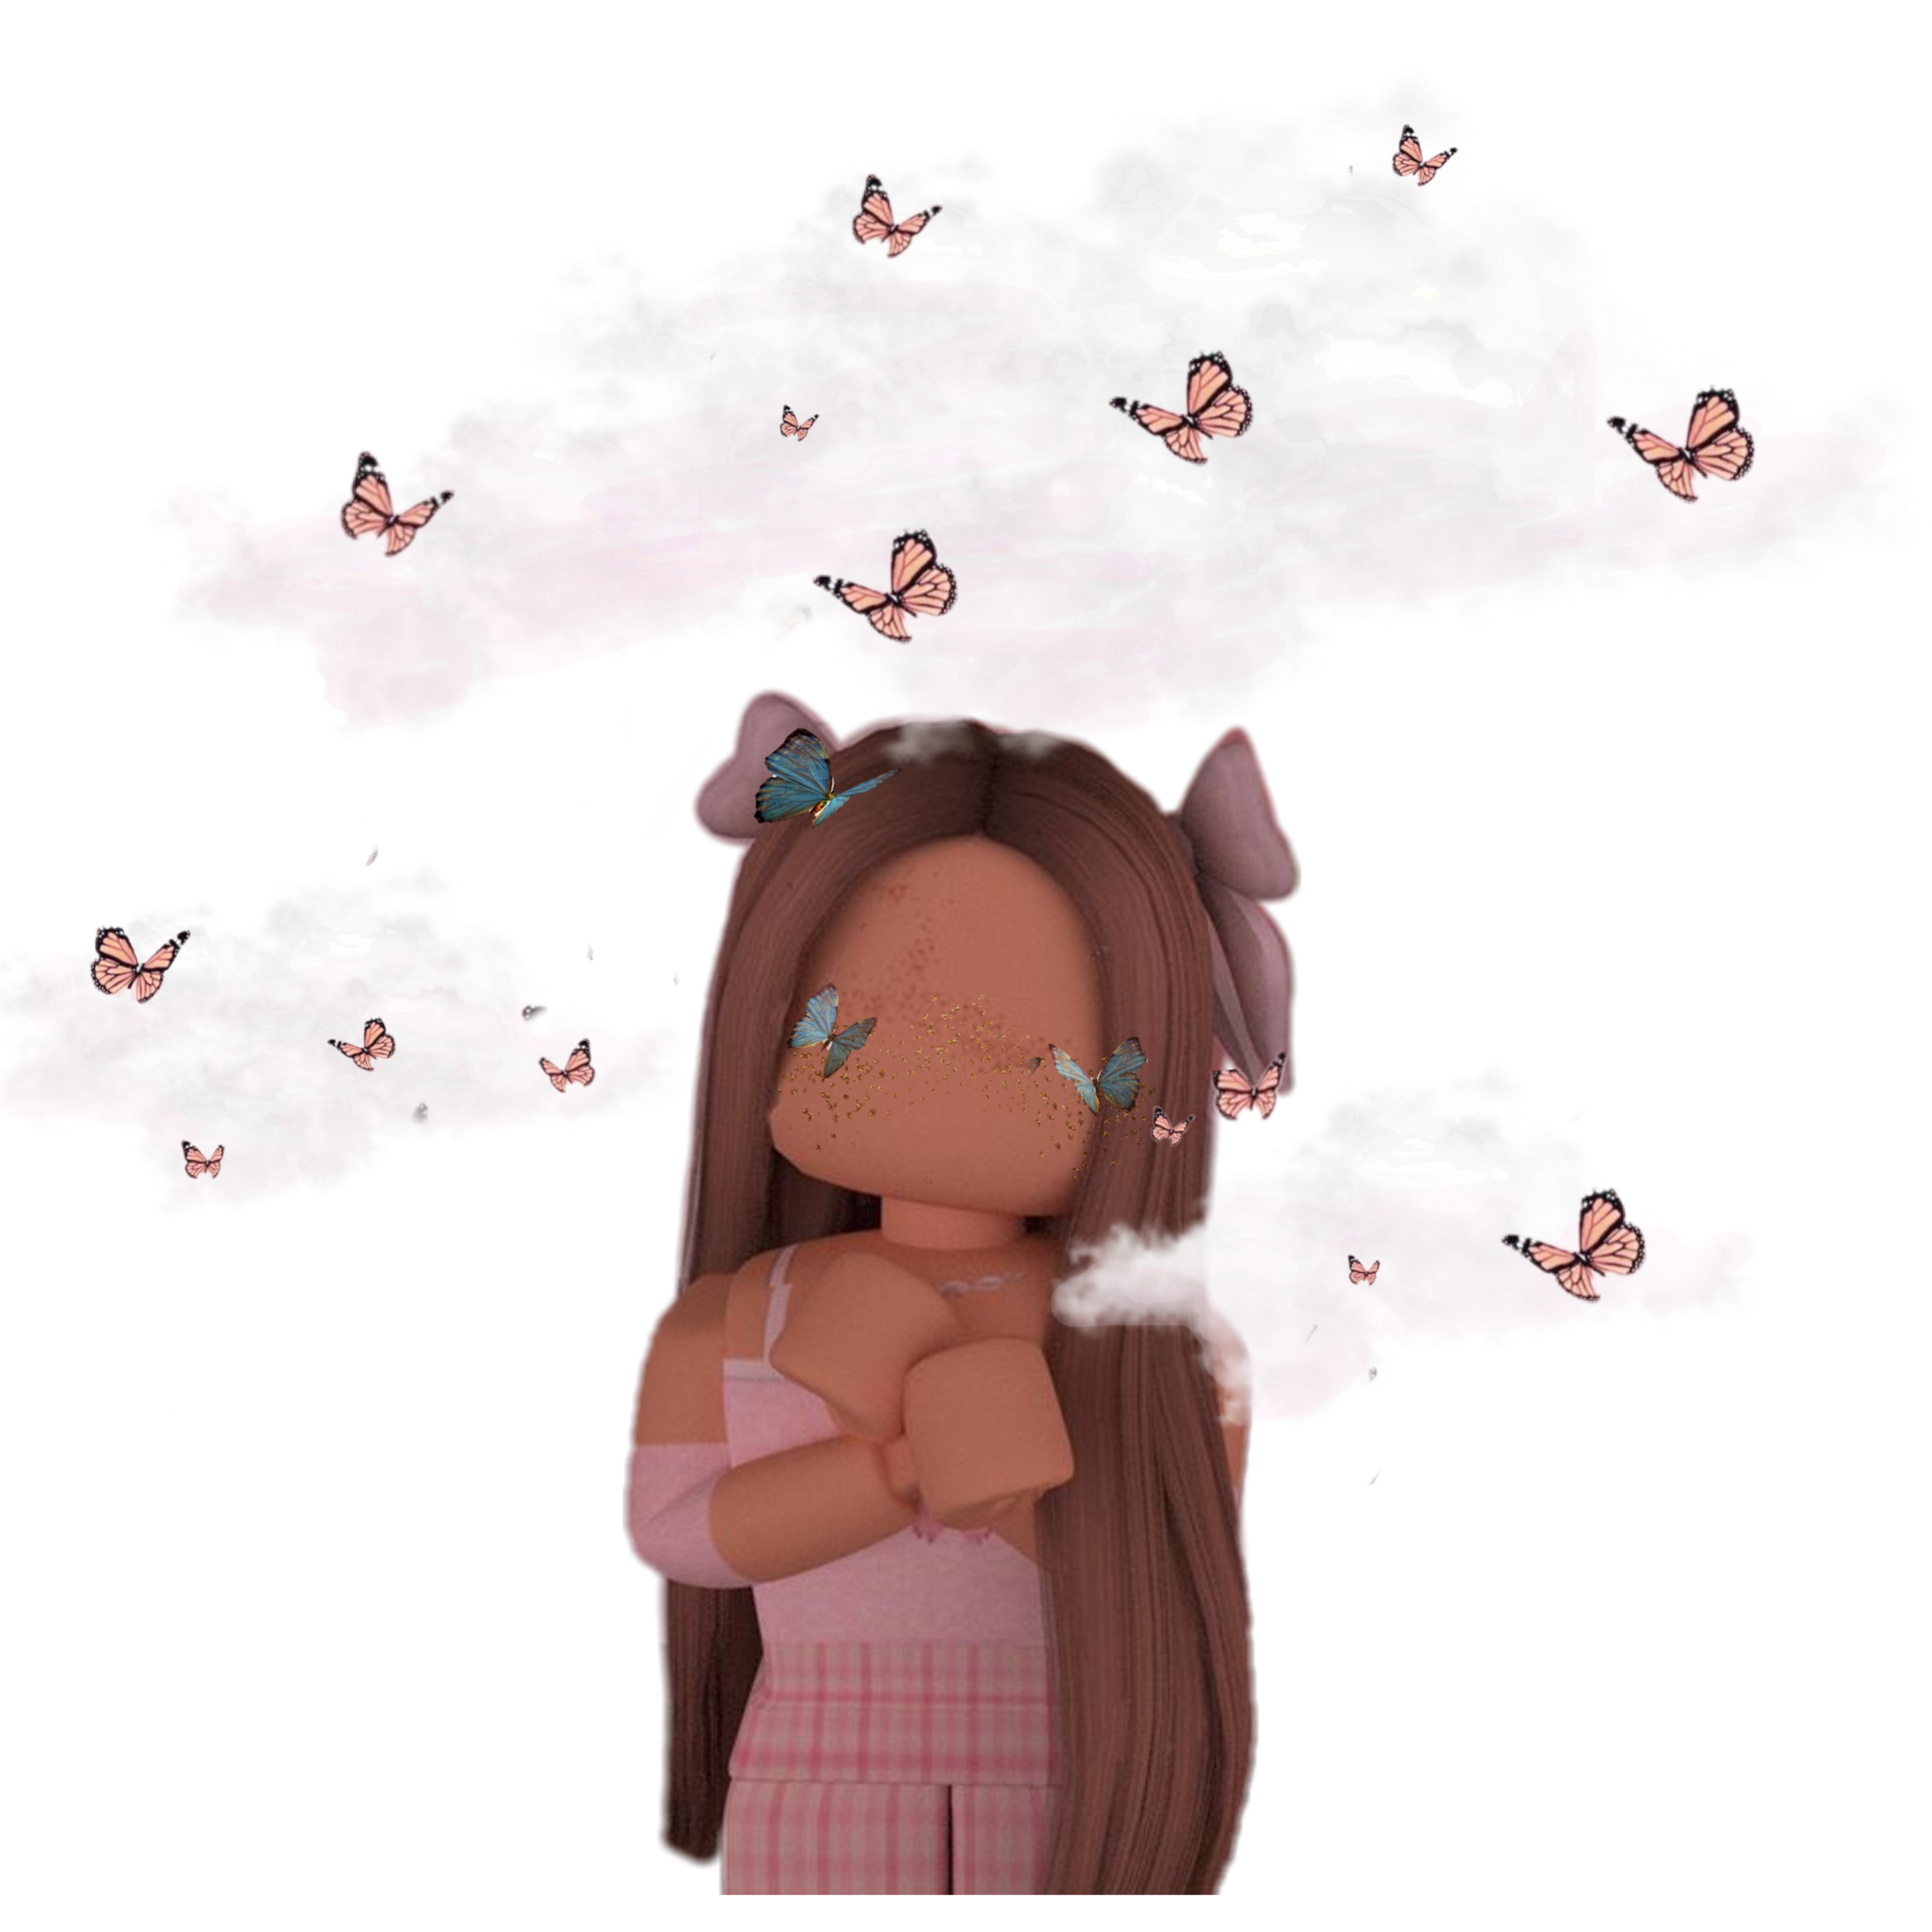 Sticker By 𝒜ℯ𝓈𝓉𝒽ℯ𝓉𝒾𝒸𝓈 By 𝓁ℯ𝓍𝒾 - aesthetic roblox girl with brown hair